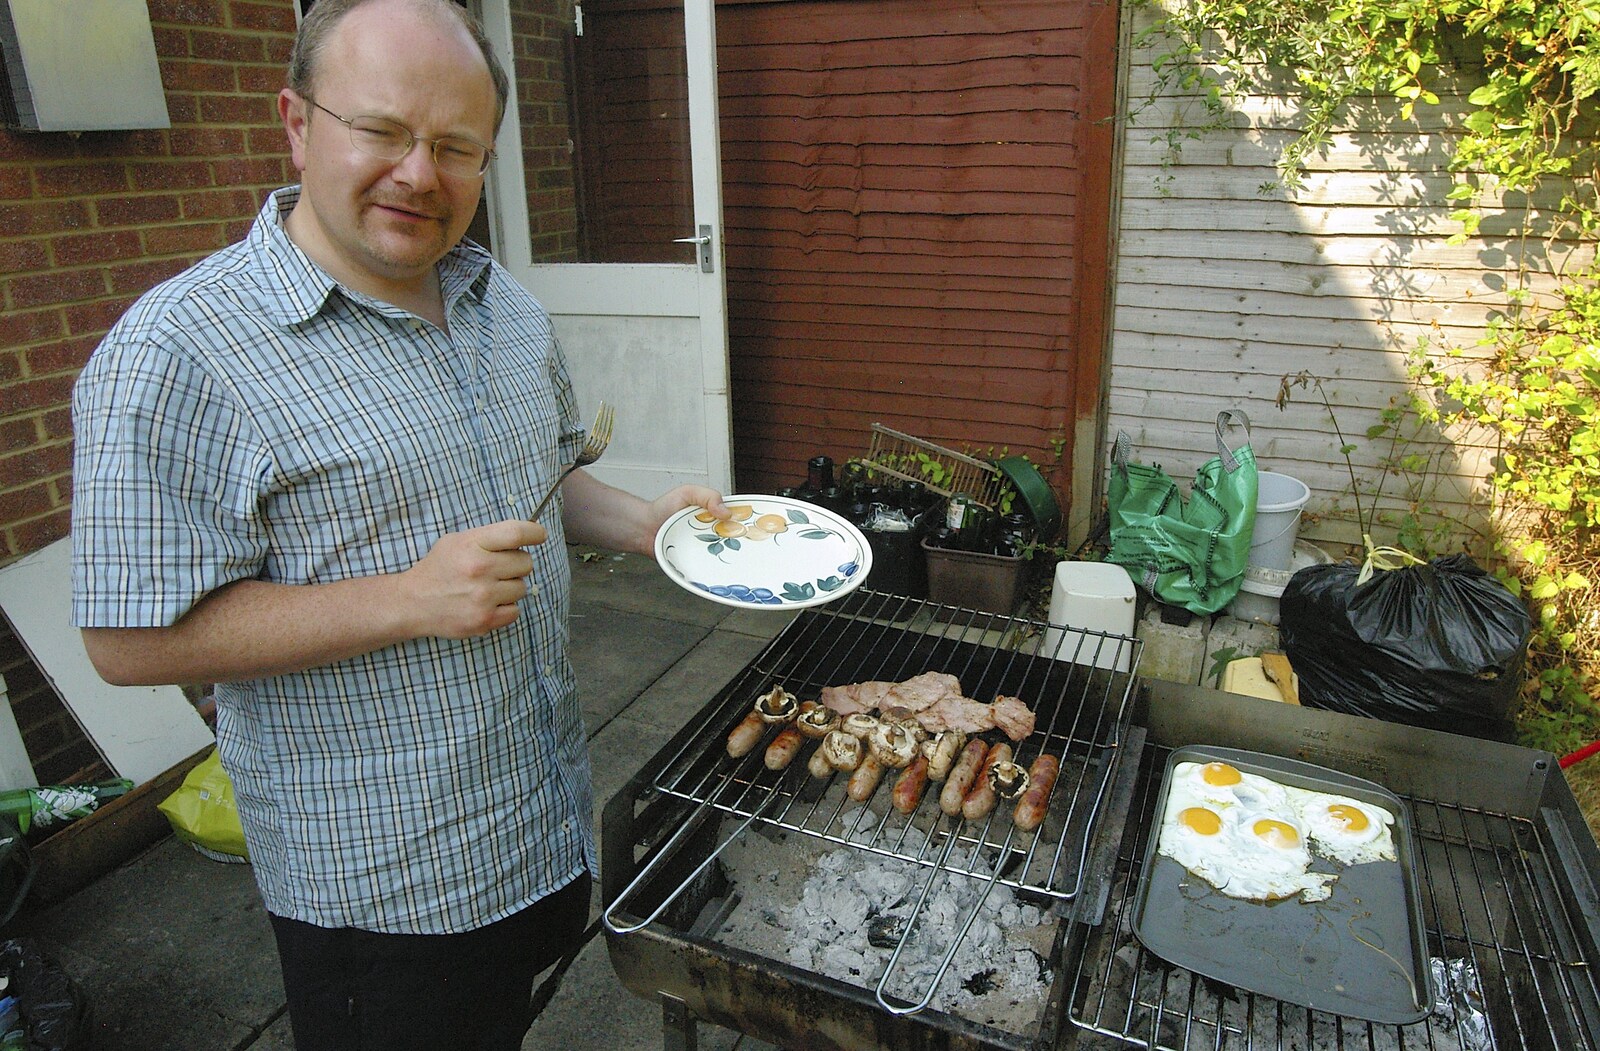 Hamish gets some barbeque offerings from Simon's Birthday Barbeque, Reading, Berkshire - 30th June 2006